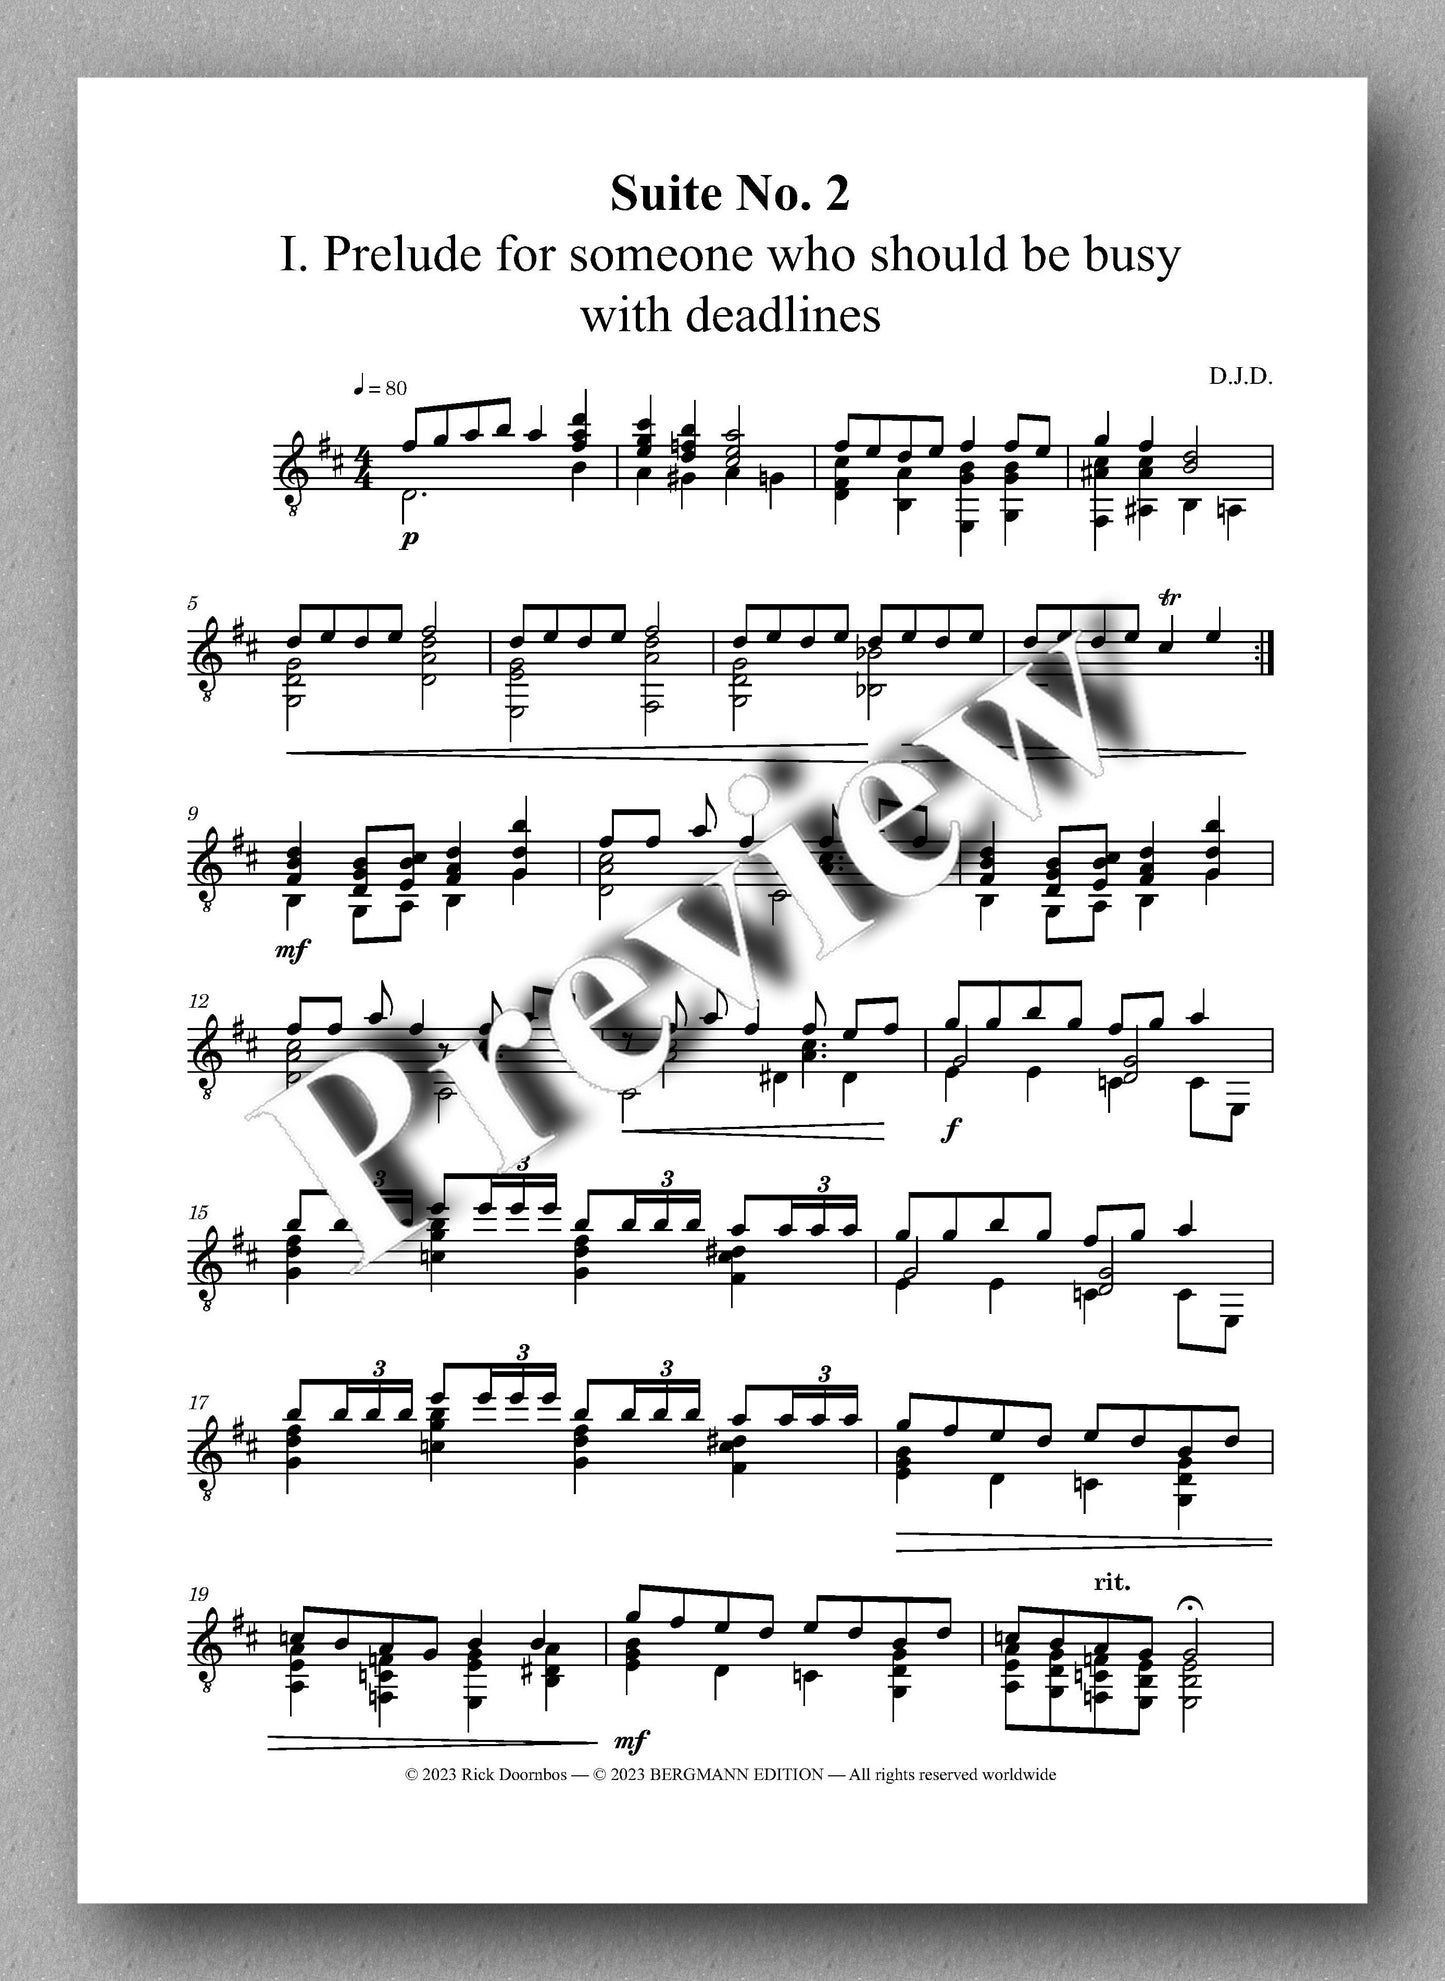 Suite No. 2 by Rick Doornbos - preview of the music score 1